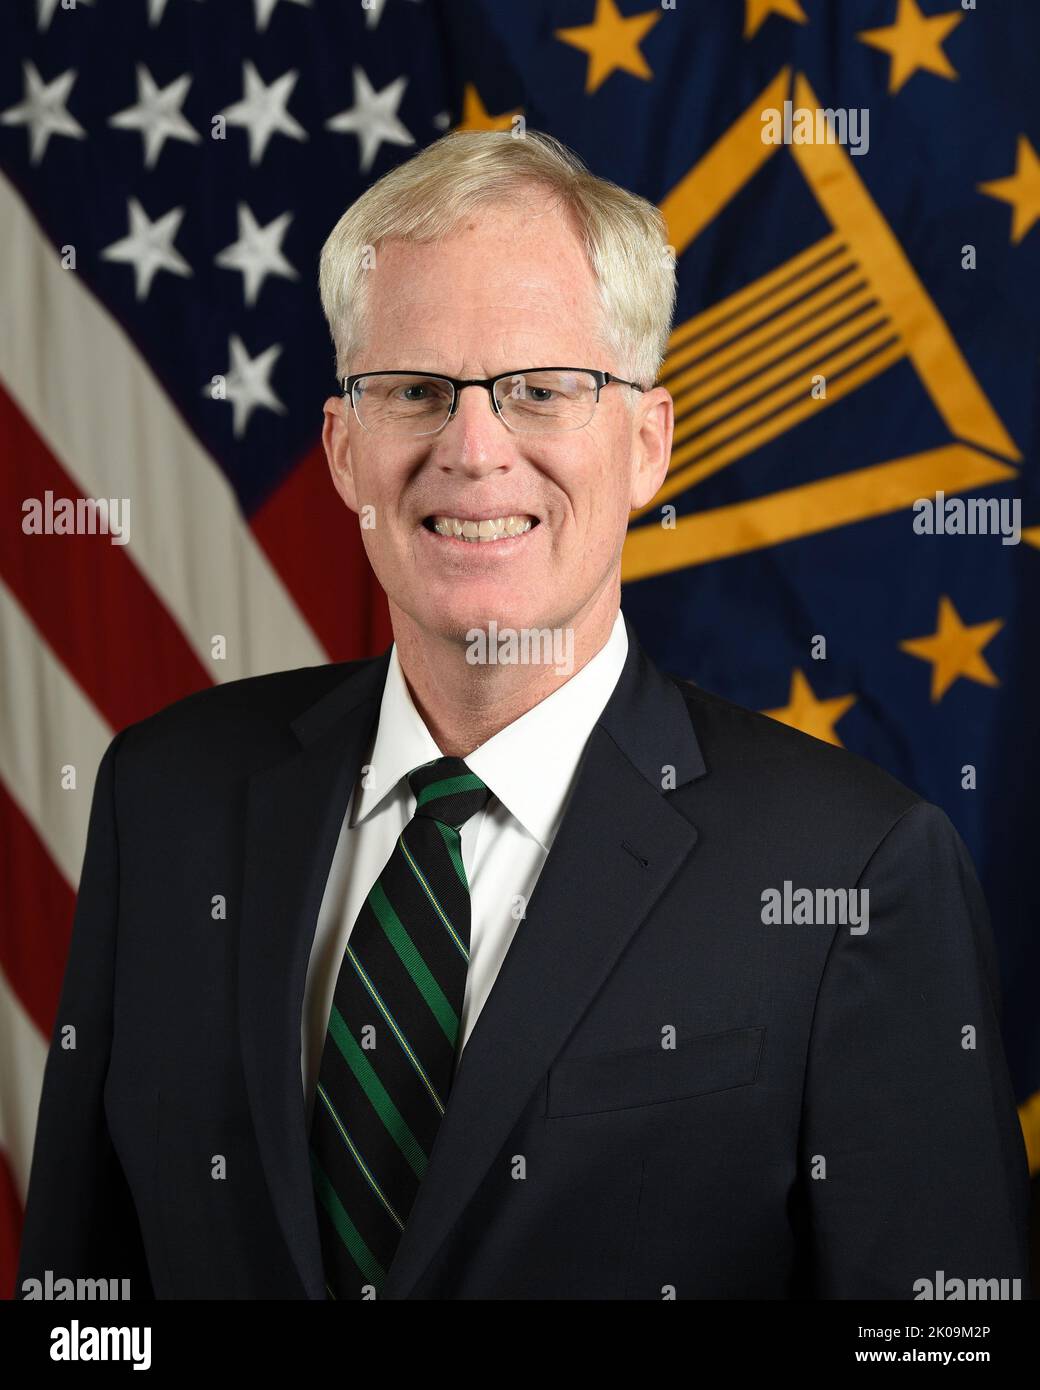 Christopher Charles Miller (born October 15, 1965) is an American retired United States Army Special Forces colonel who served as acting United States secretary of defense from November 9, 2020, to January 20, 2021. He previously served as Director of the National Counterterrorism Center from August 10 to November 9, 2020. Before his civilian service in the Department of Defense, Miller was a Green Beret, commanding 5th Special Forces Group in Iraq and Afghanistan, and later spent time as a defense contractor. Stock Photo